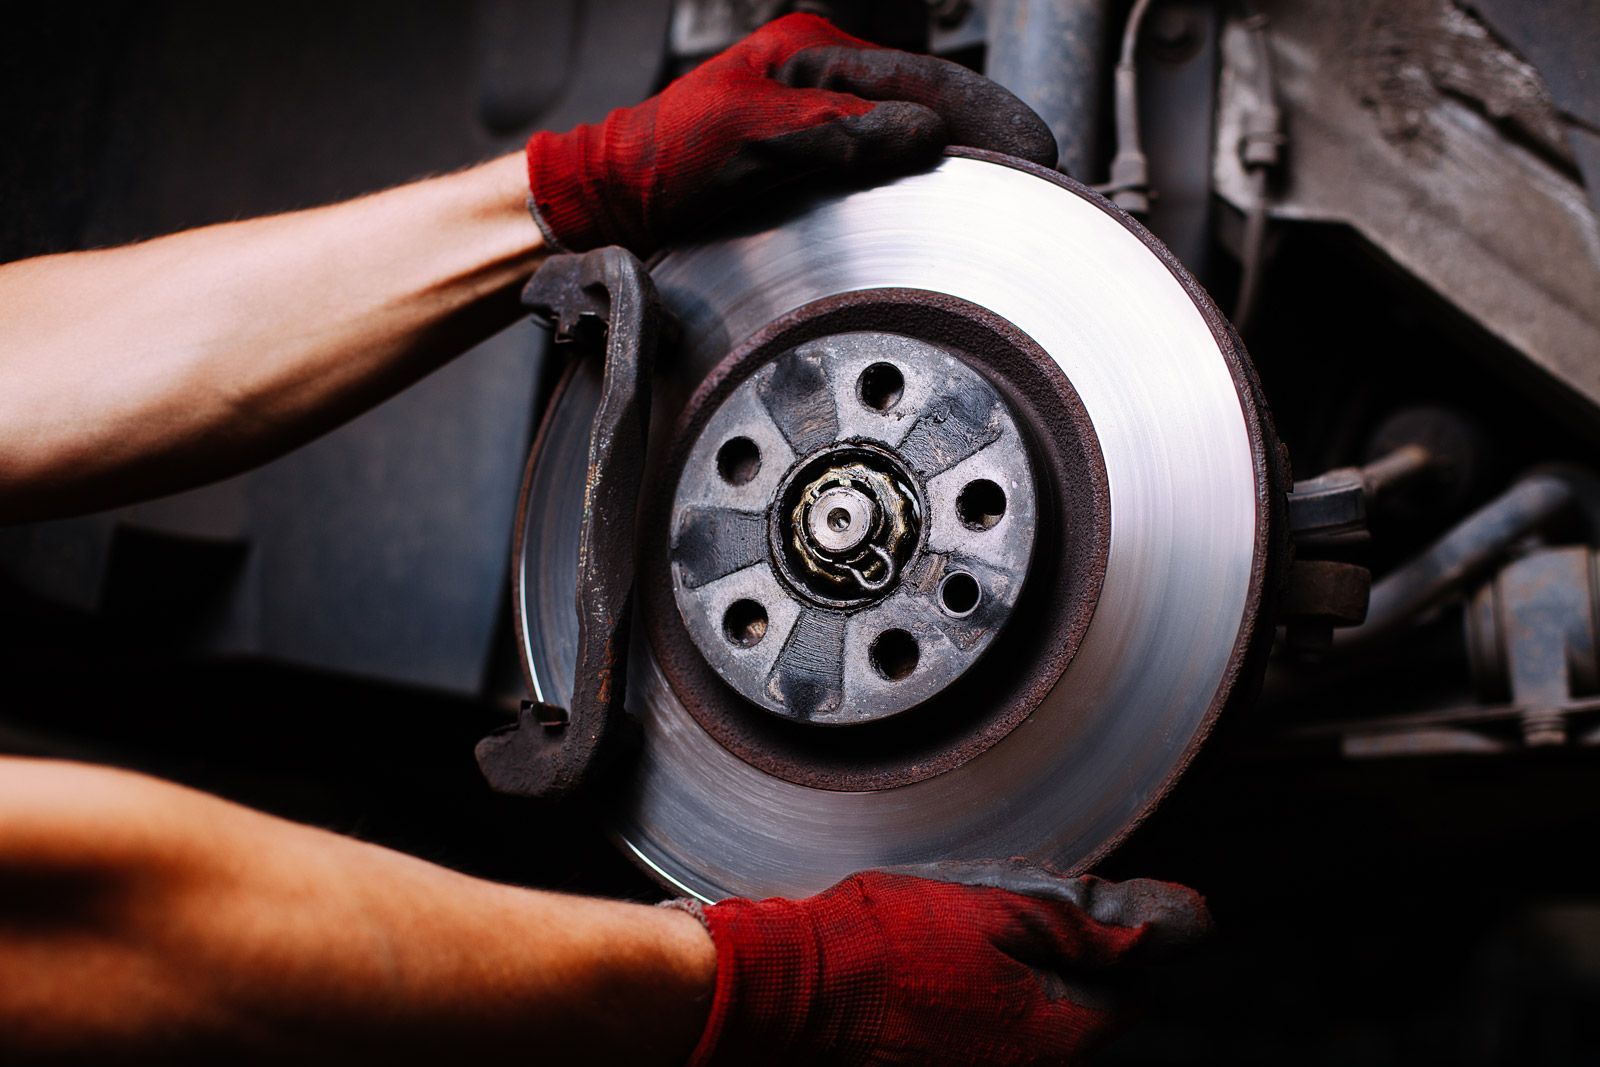 A person is fixing a brake disc on a car.